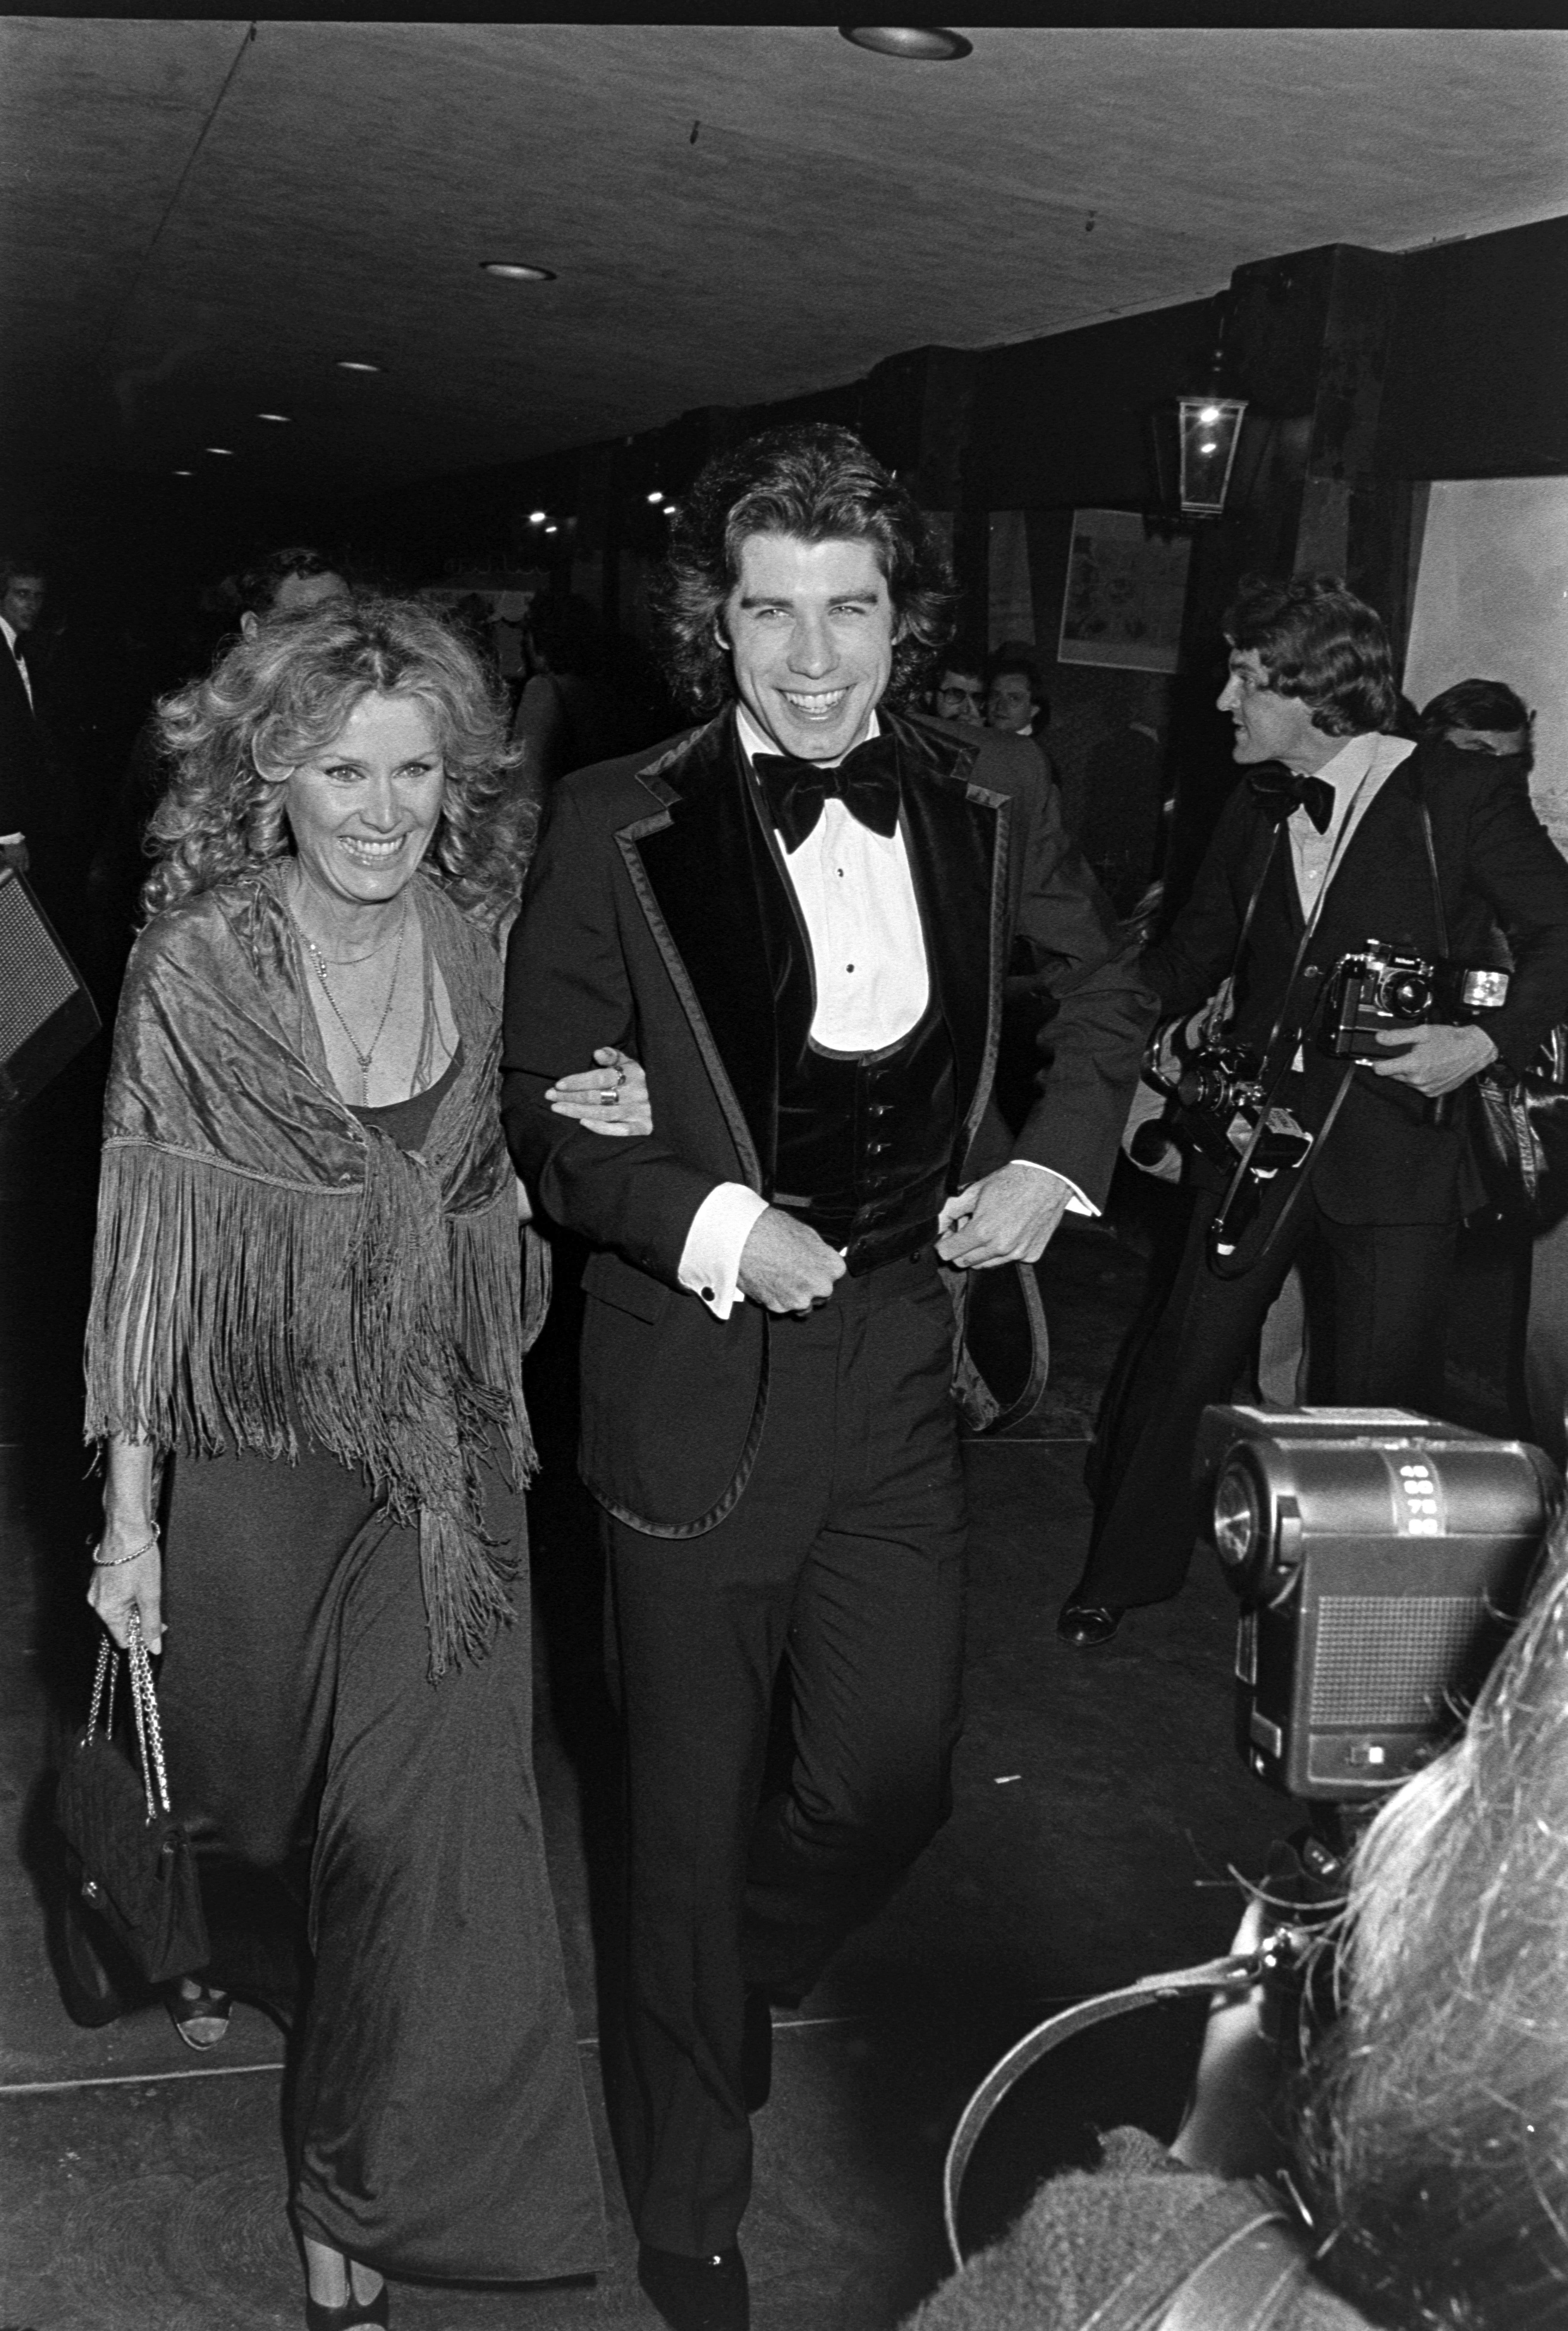 Diana Hyland and John Travolta at an event in Los Angeles, California on December 8, 1976 | Source: Getty Images